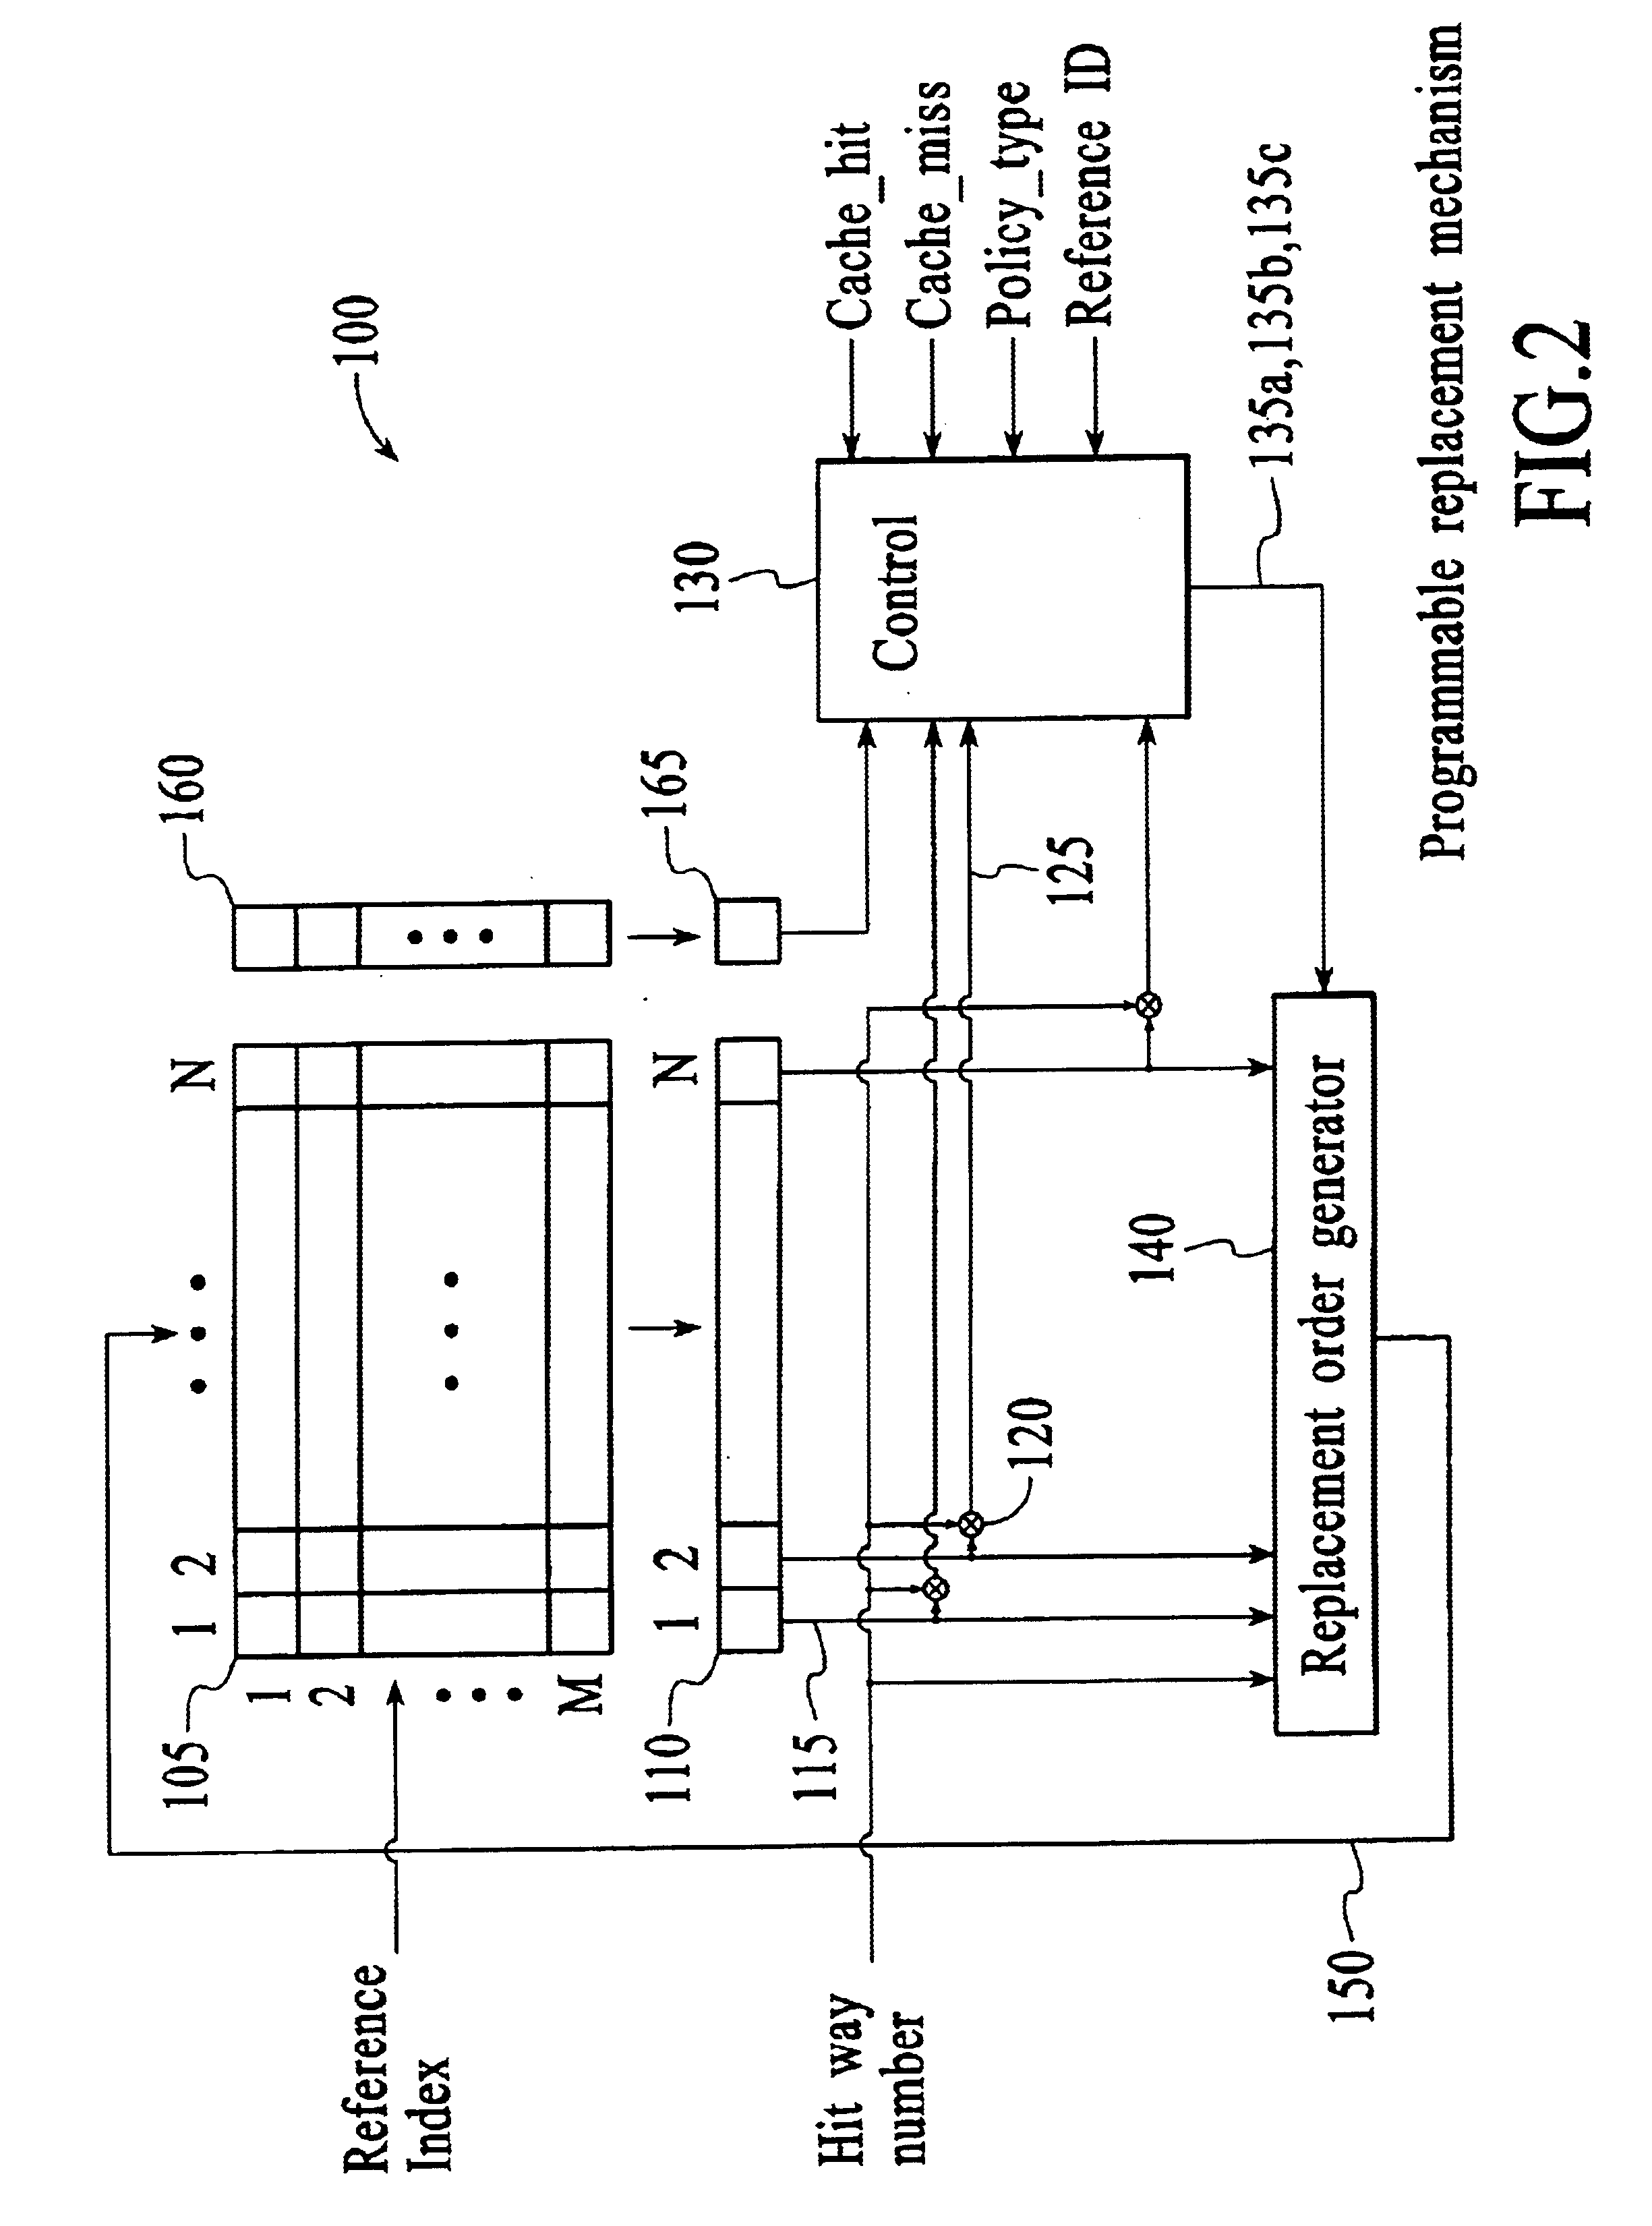 Method and system for programmable replacement mechanism for caching devices